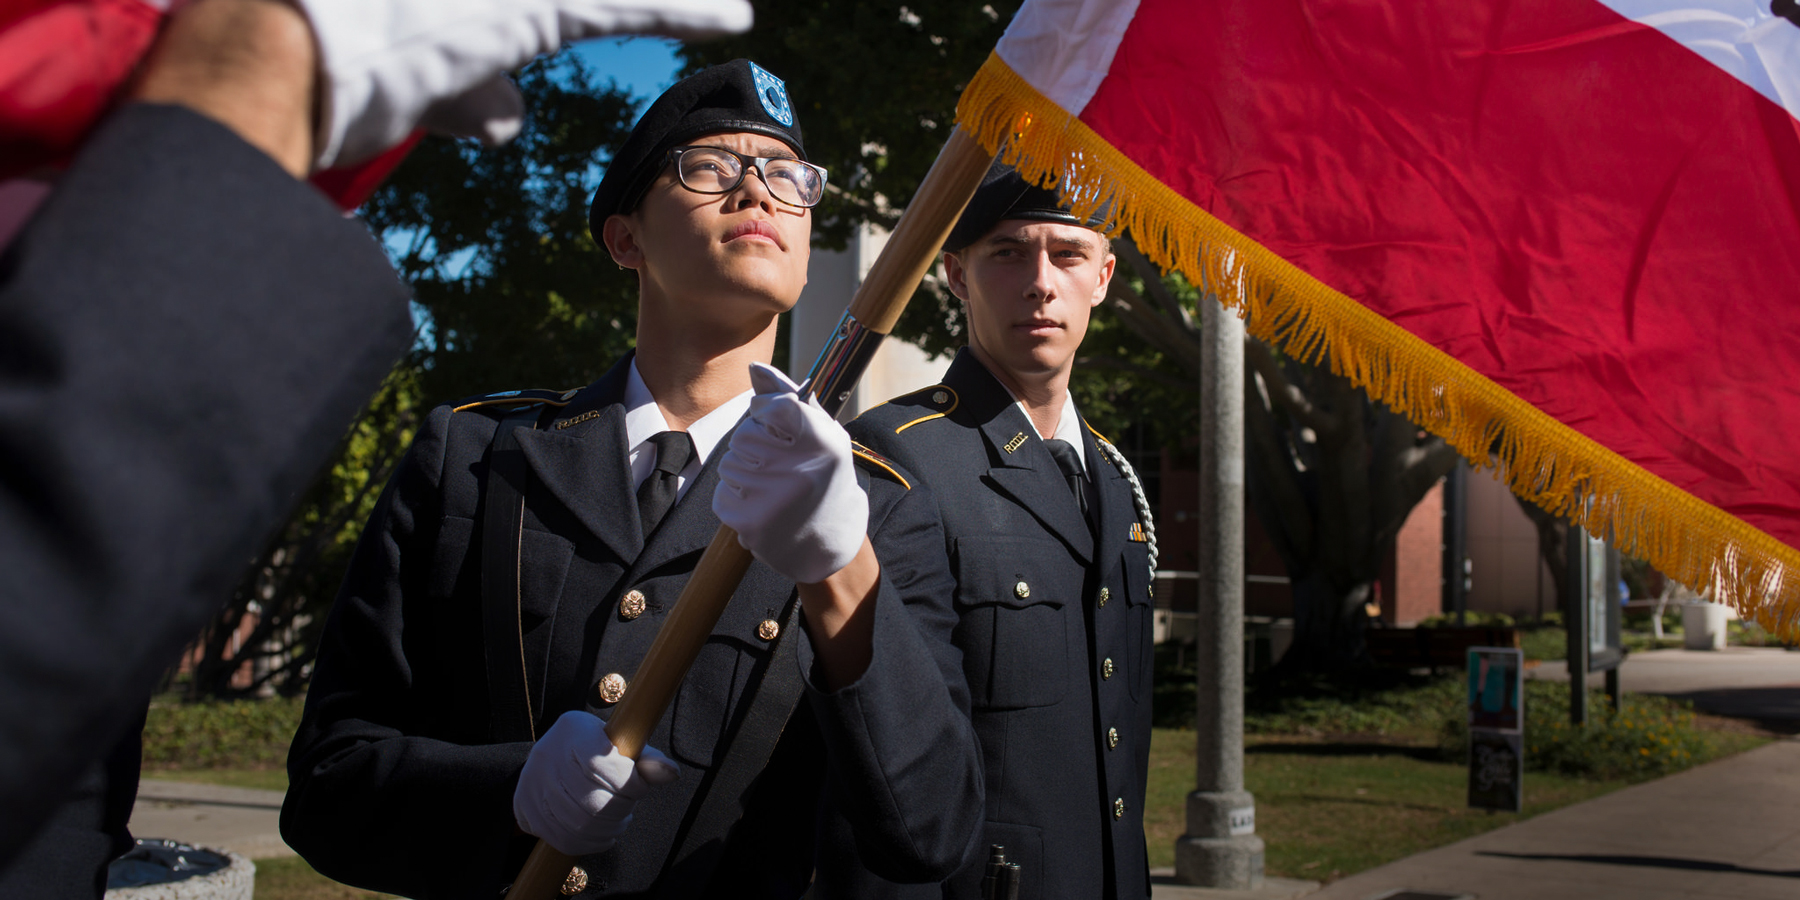 two military cadets perform a flag raising ceremony